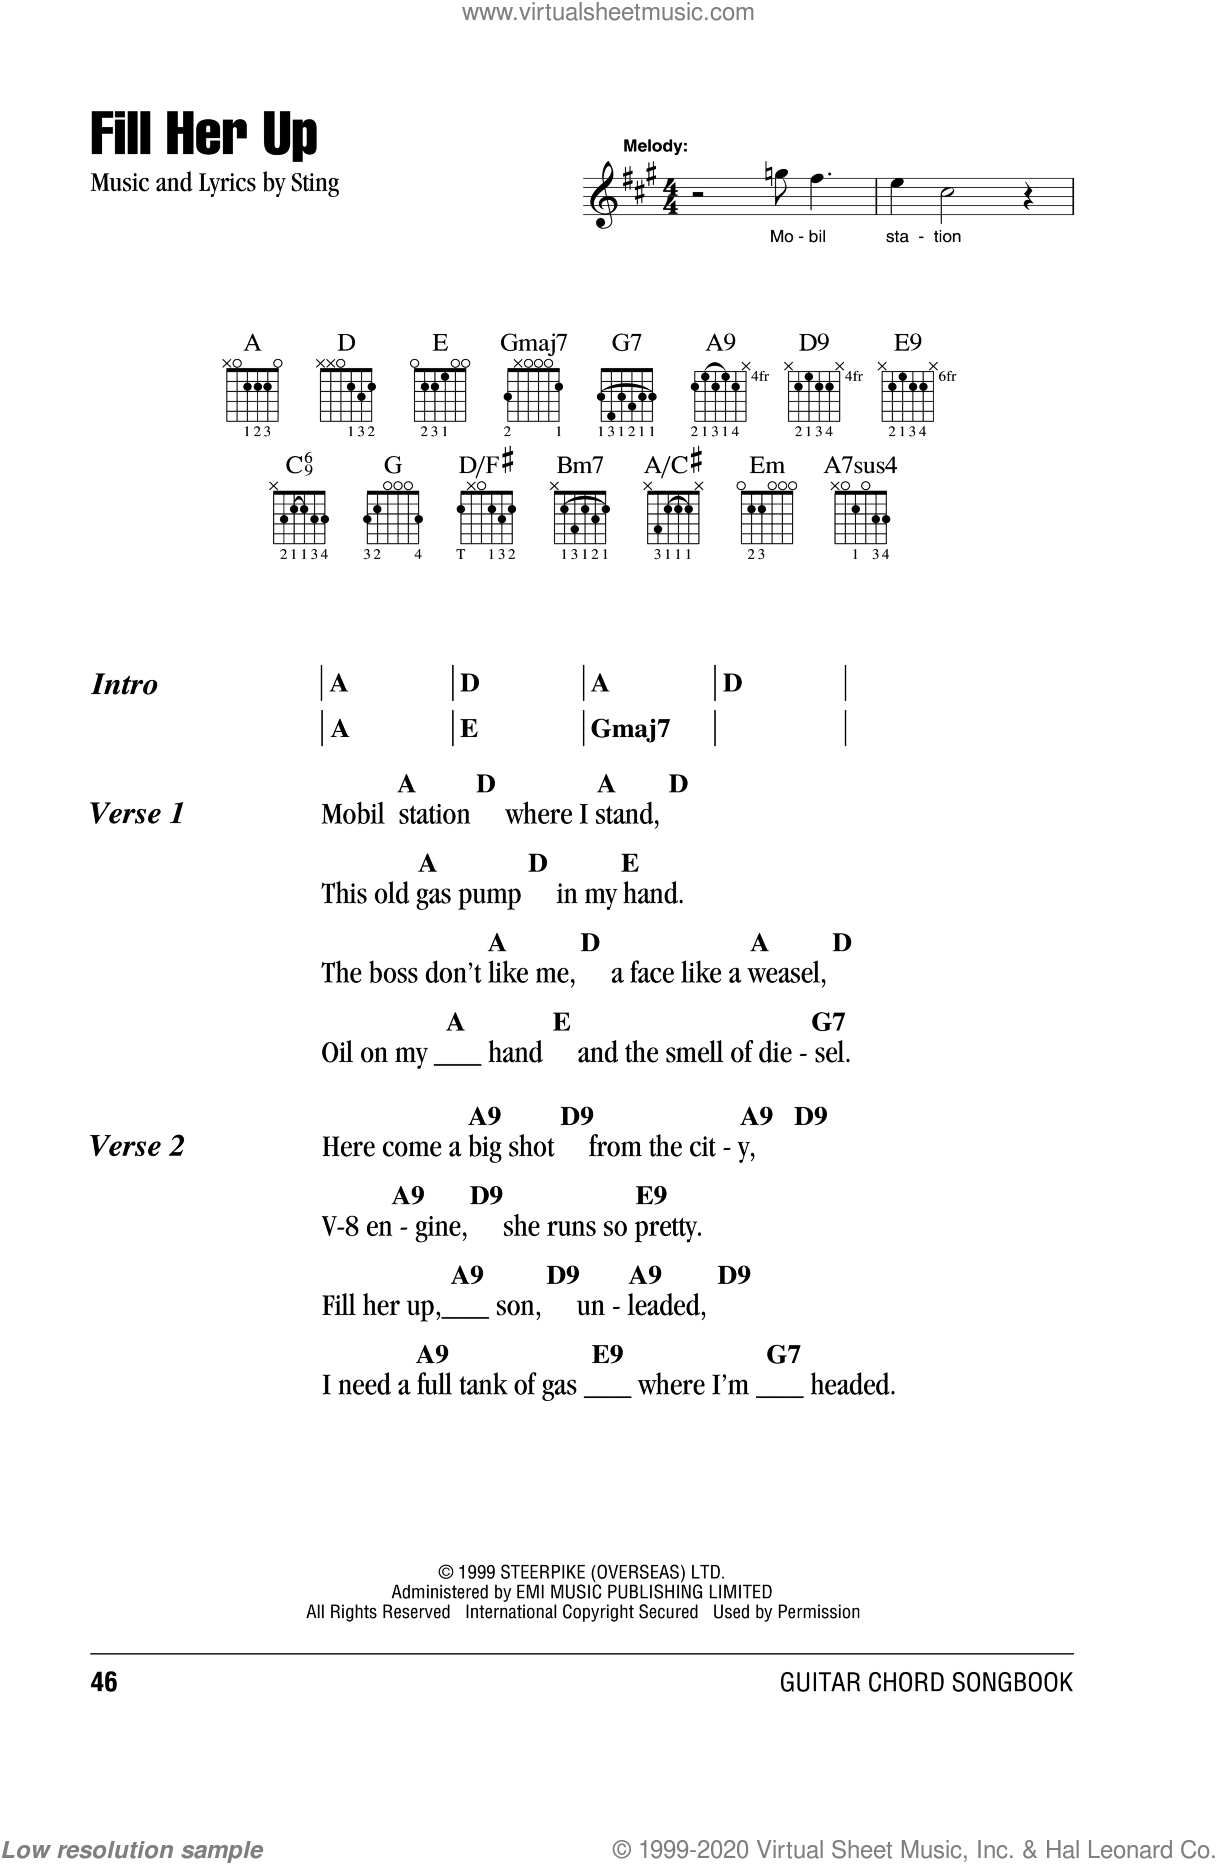 Sting - Fill Her Up sheet music for guitar (chords) [PDF]